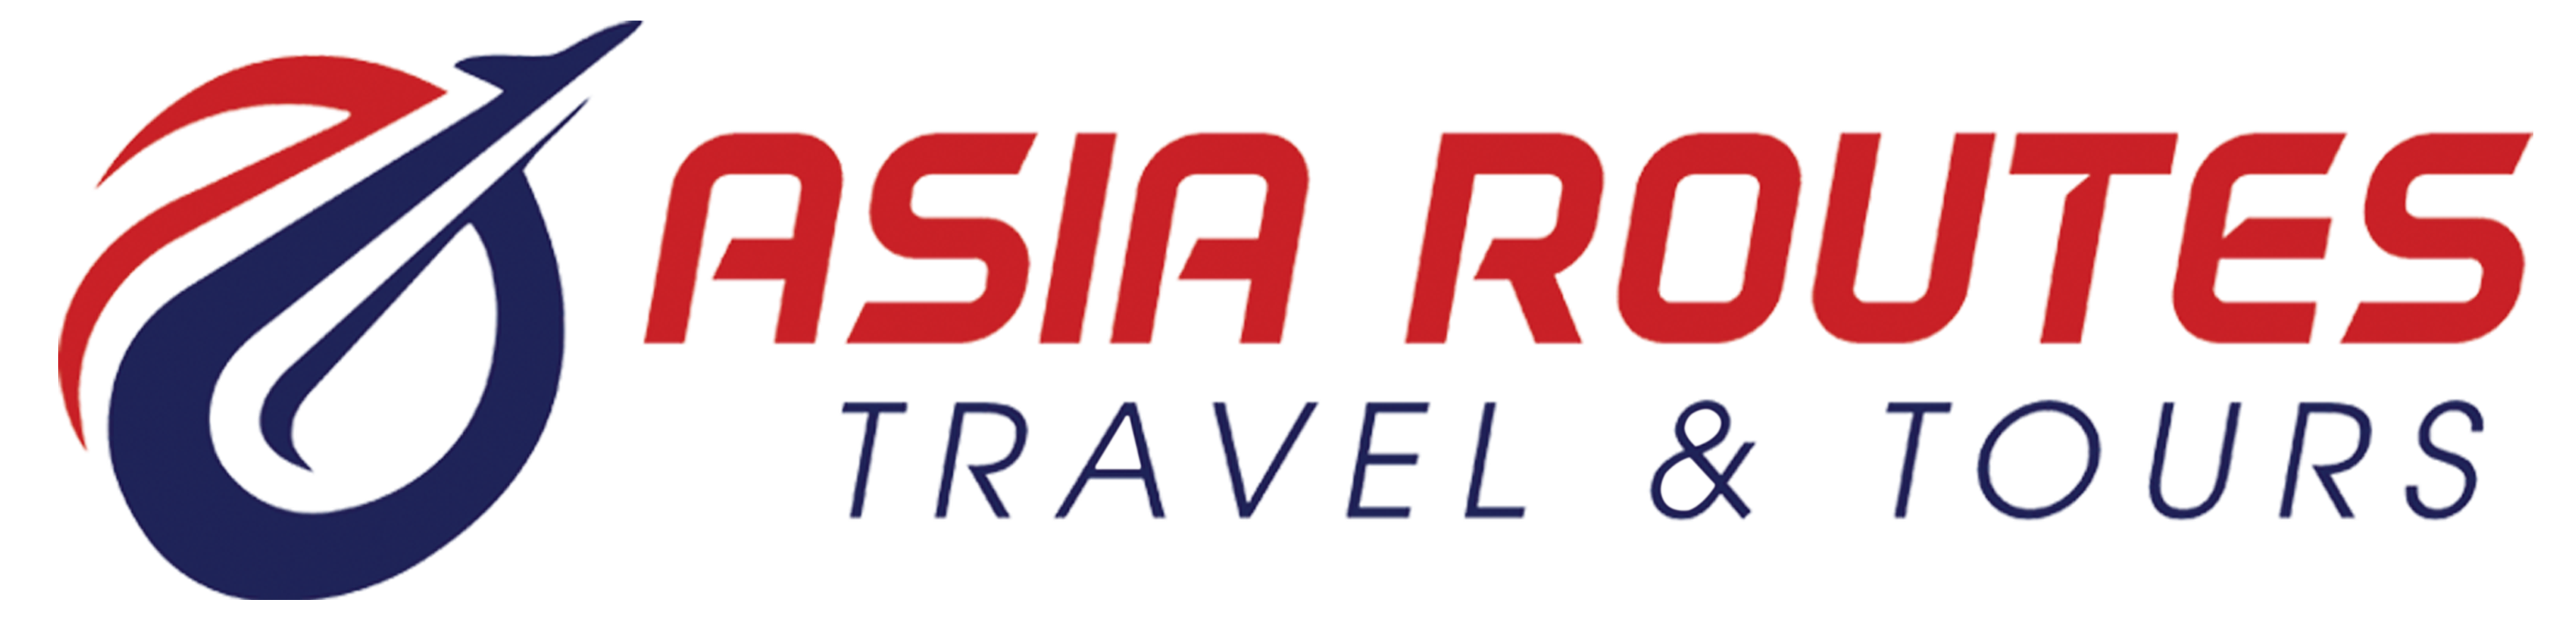 Asia Routes Travel & Tours | Just another WordPress site